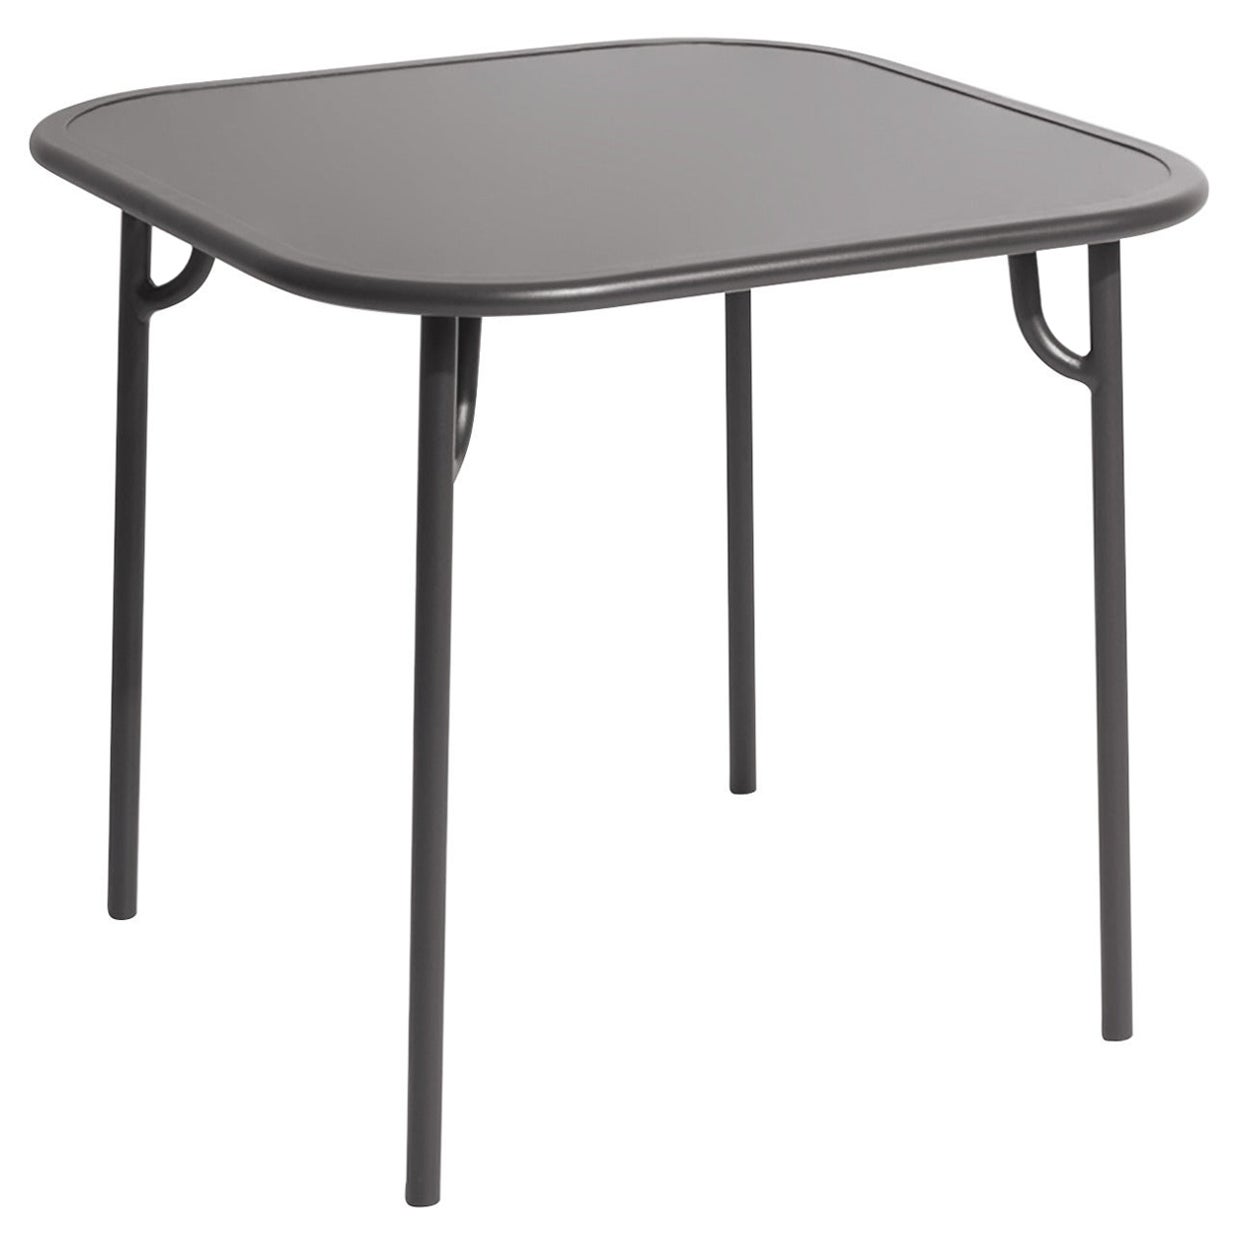 Petite Friture Week-End Plain Square Dining Table in Anthracite Aluminium, 2017